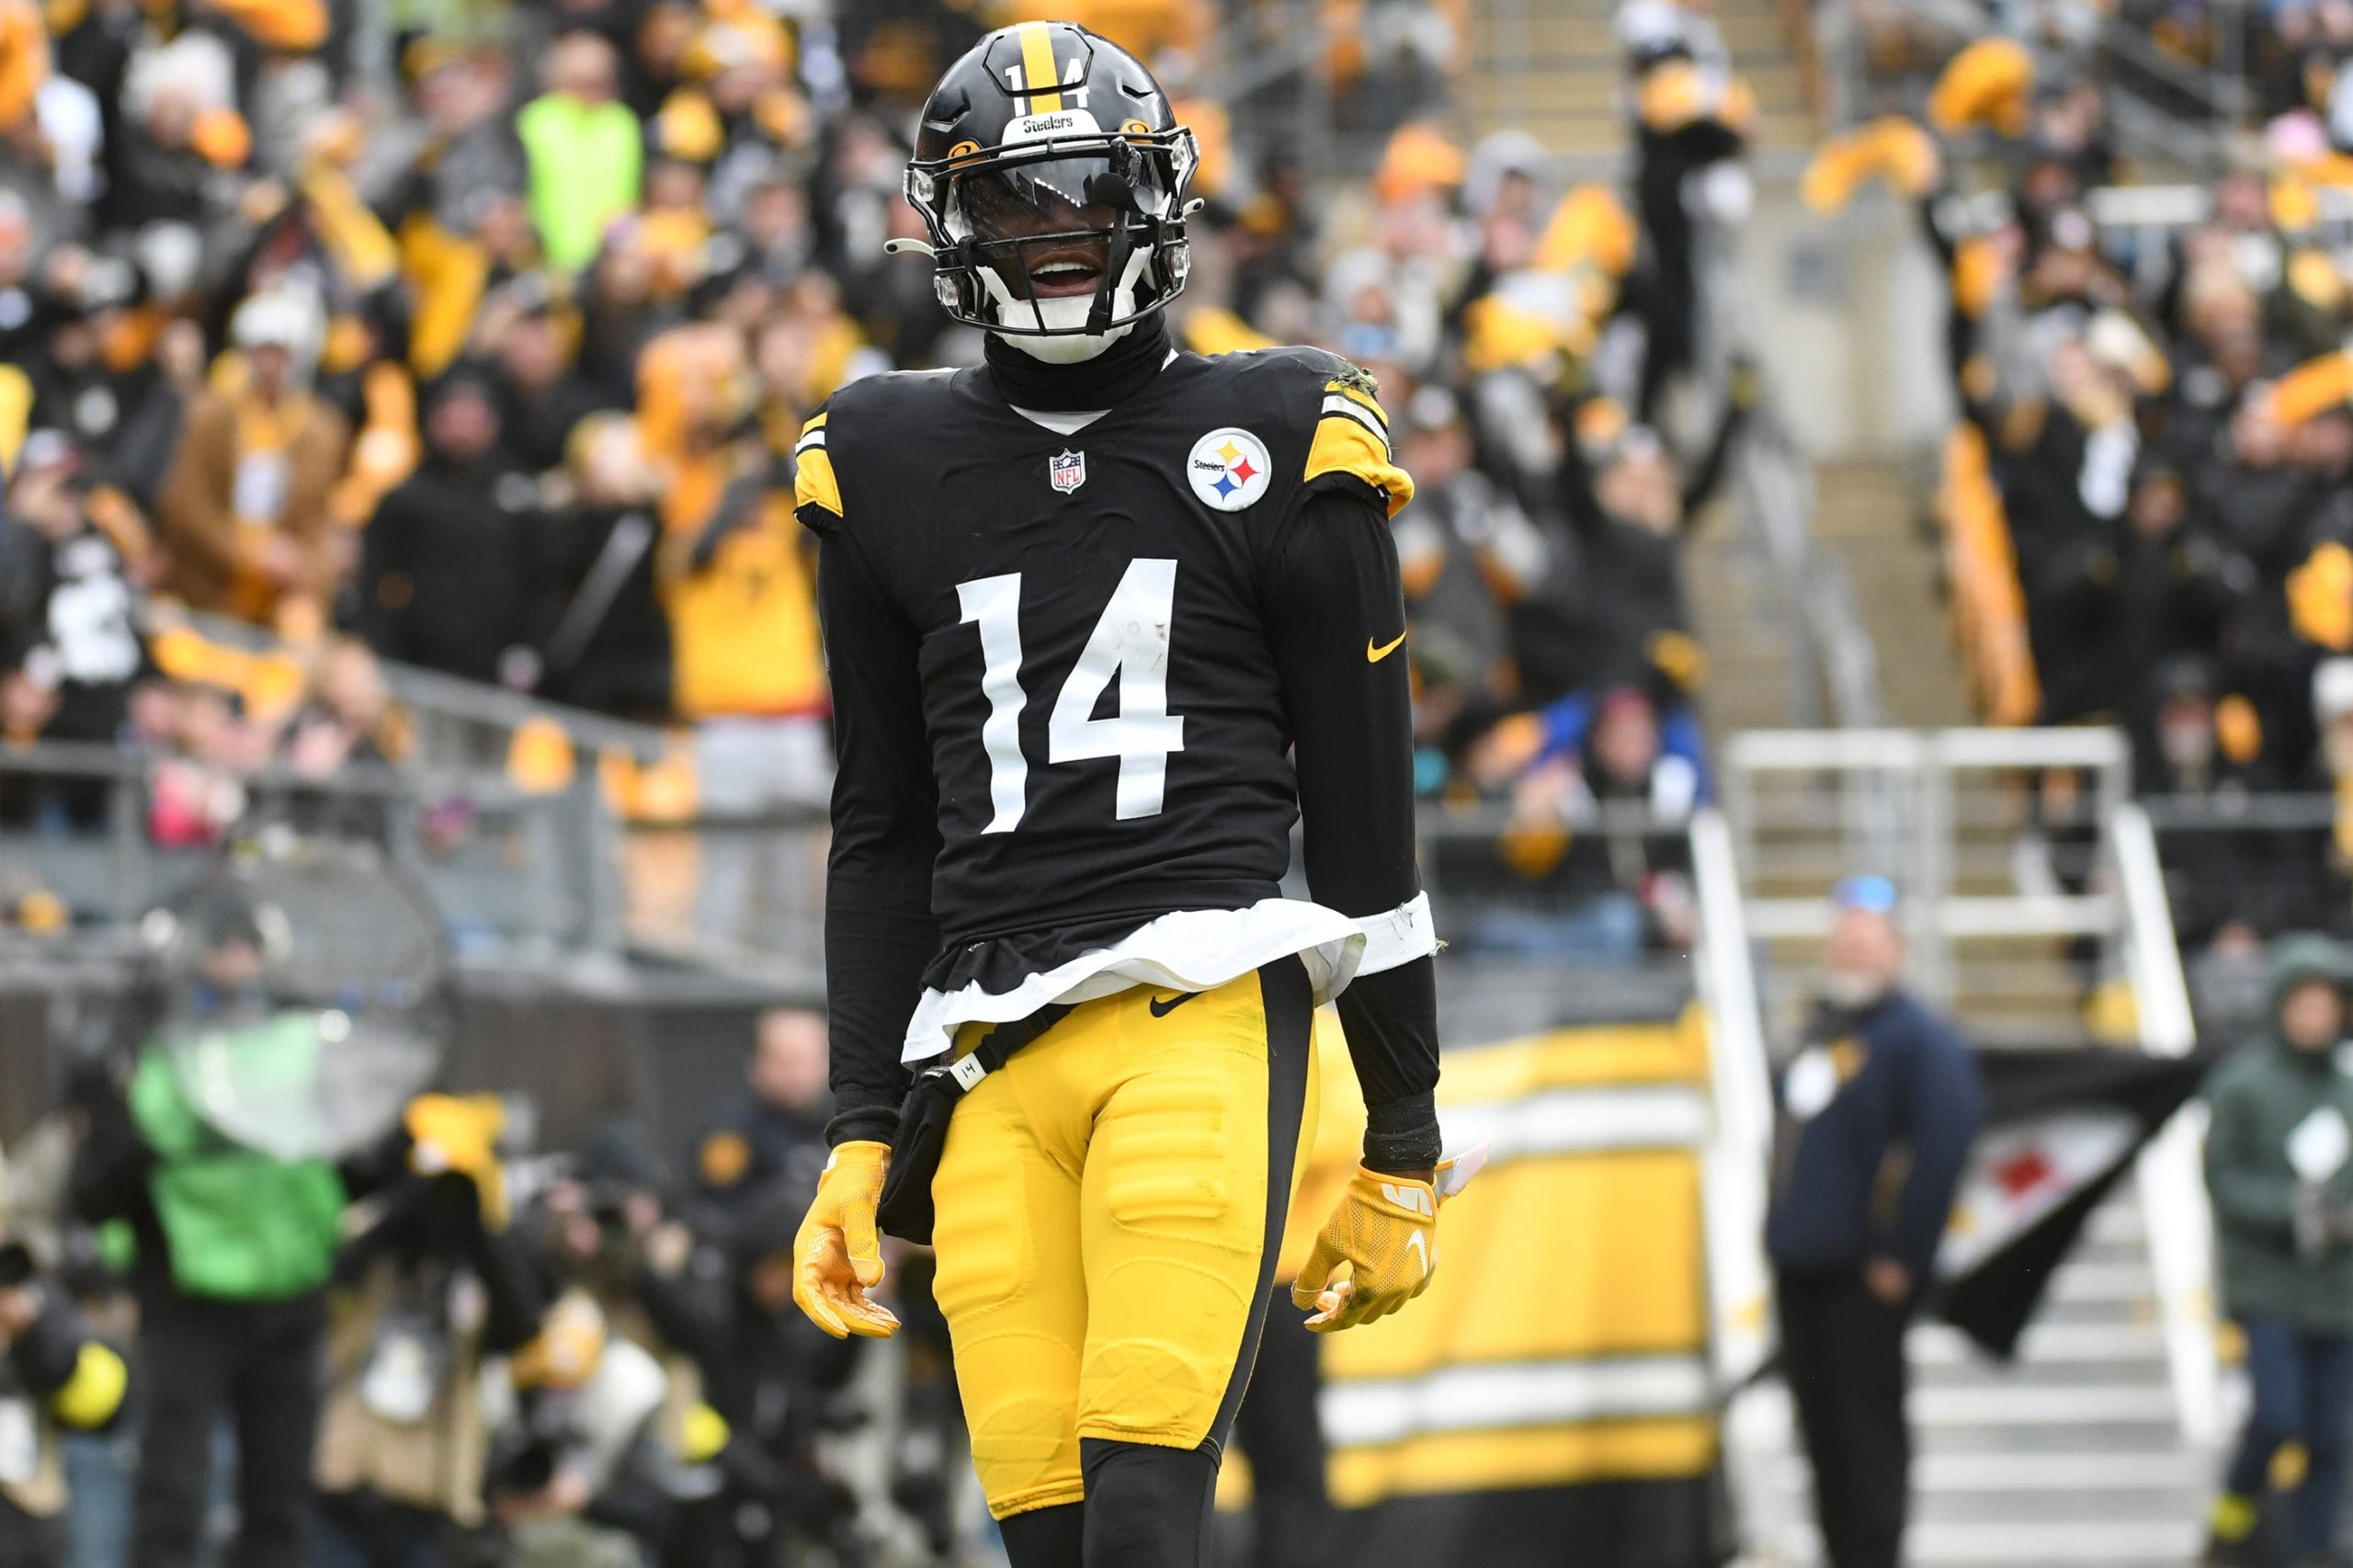 NFL DFS Picks for Steelers vs Colts Monday night